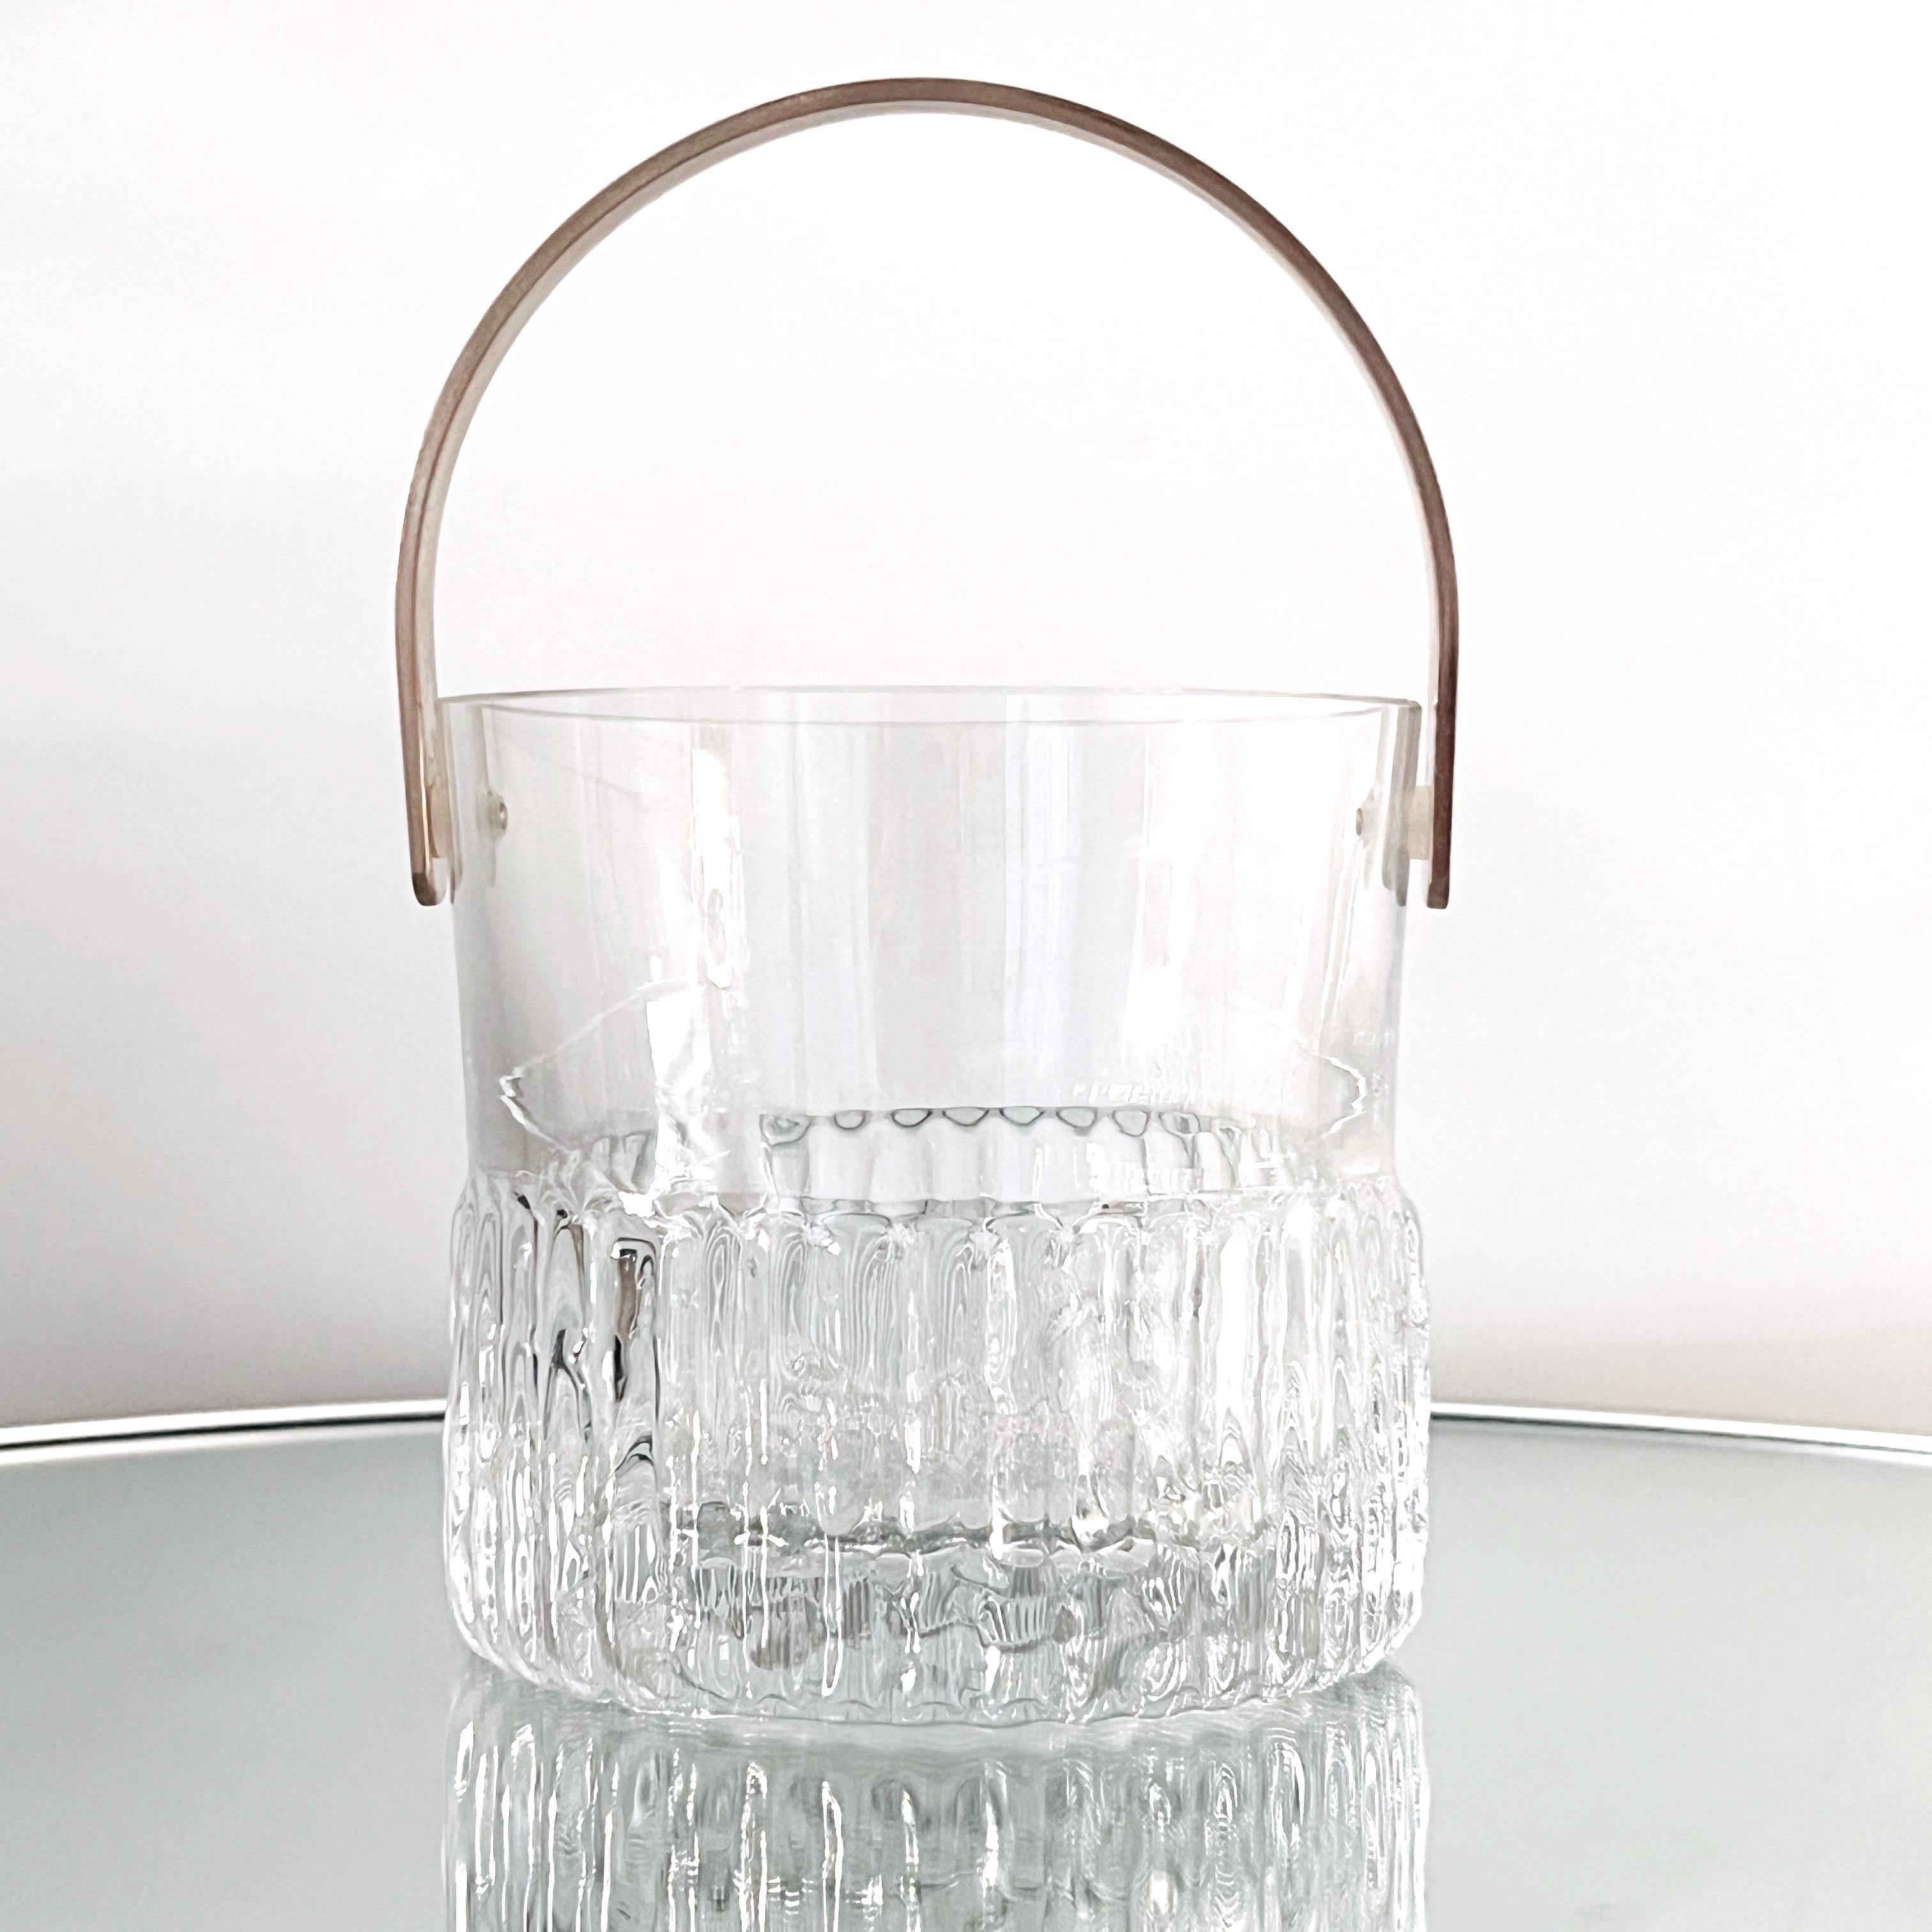 Late 20th Century Mid-Century Modern Crystal Ice Bucket with Textured Glass, France, c. 1970s For Sale